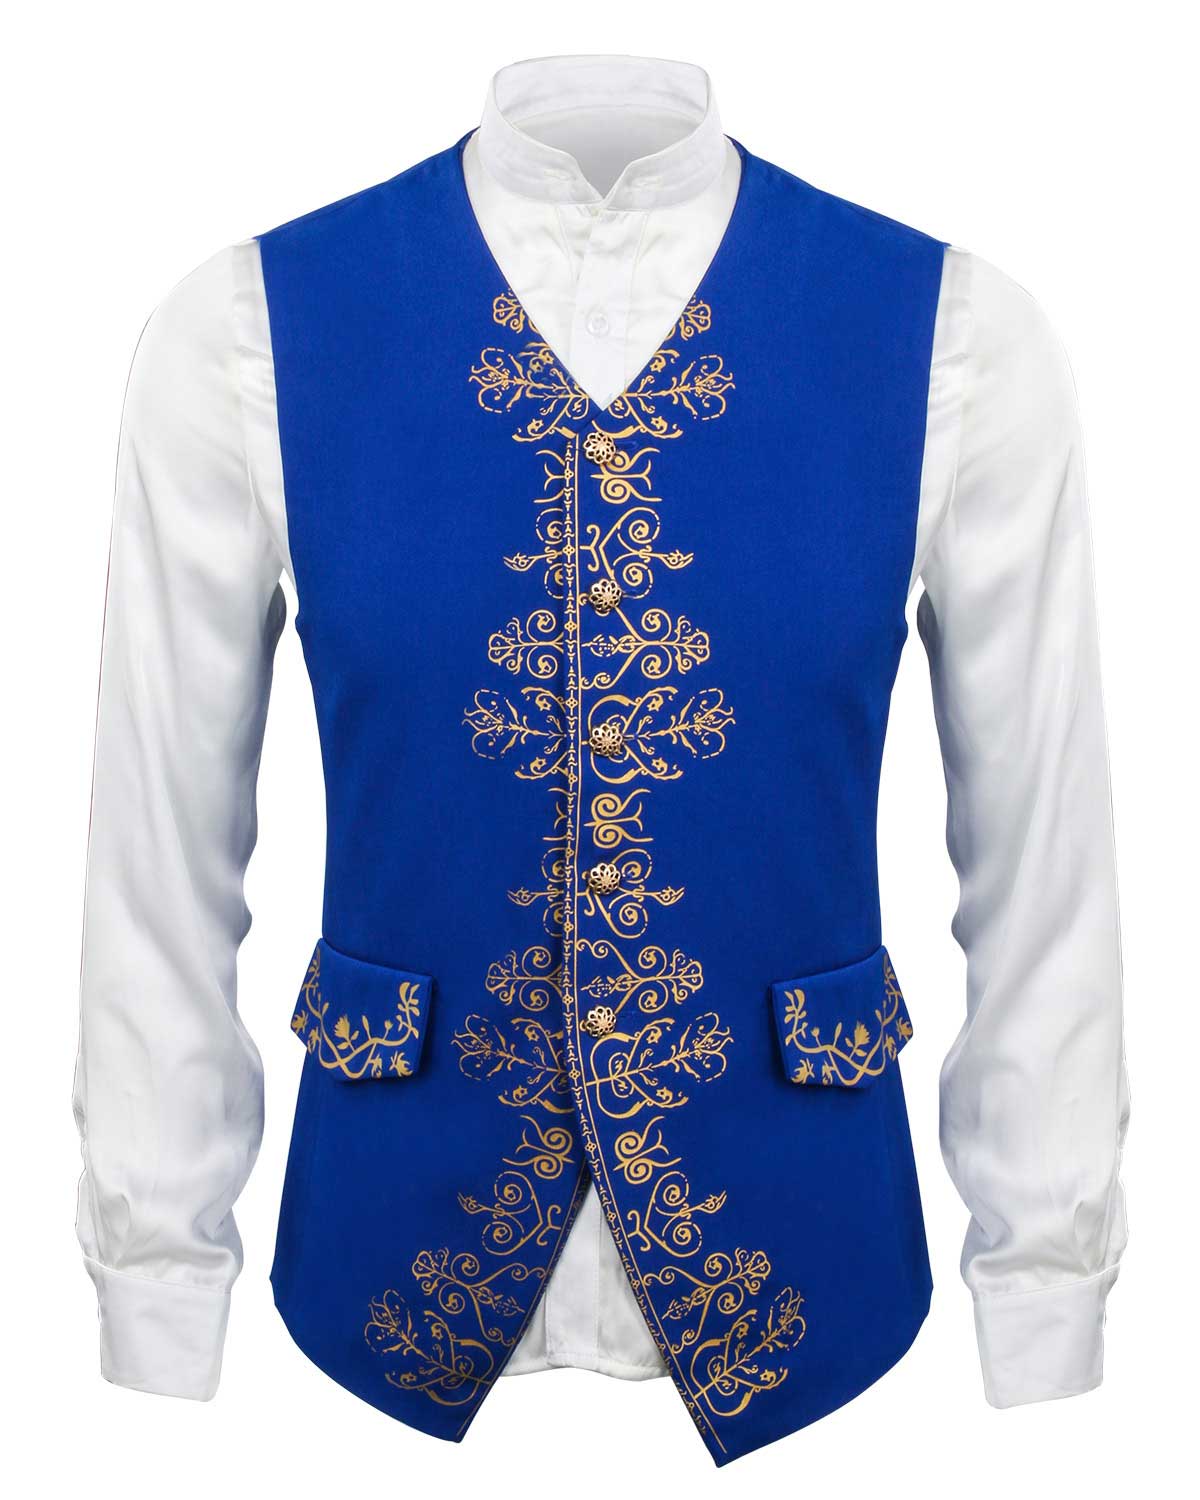 Beauty and the Beast Prince Adam Suit Cosplay Costume Adults Halloween Outfit